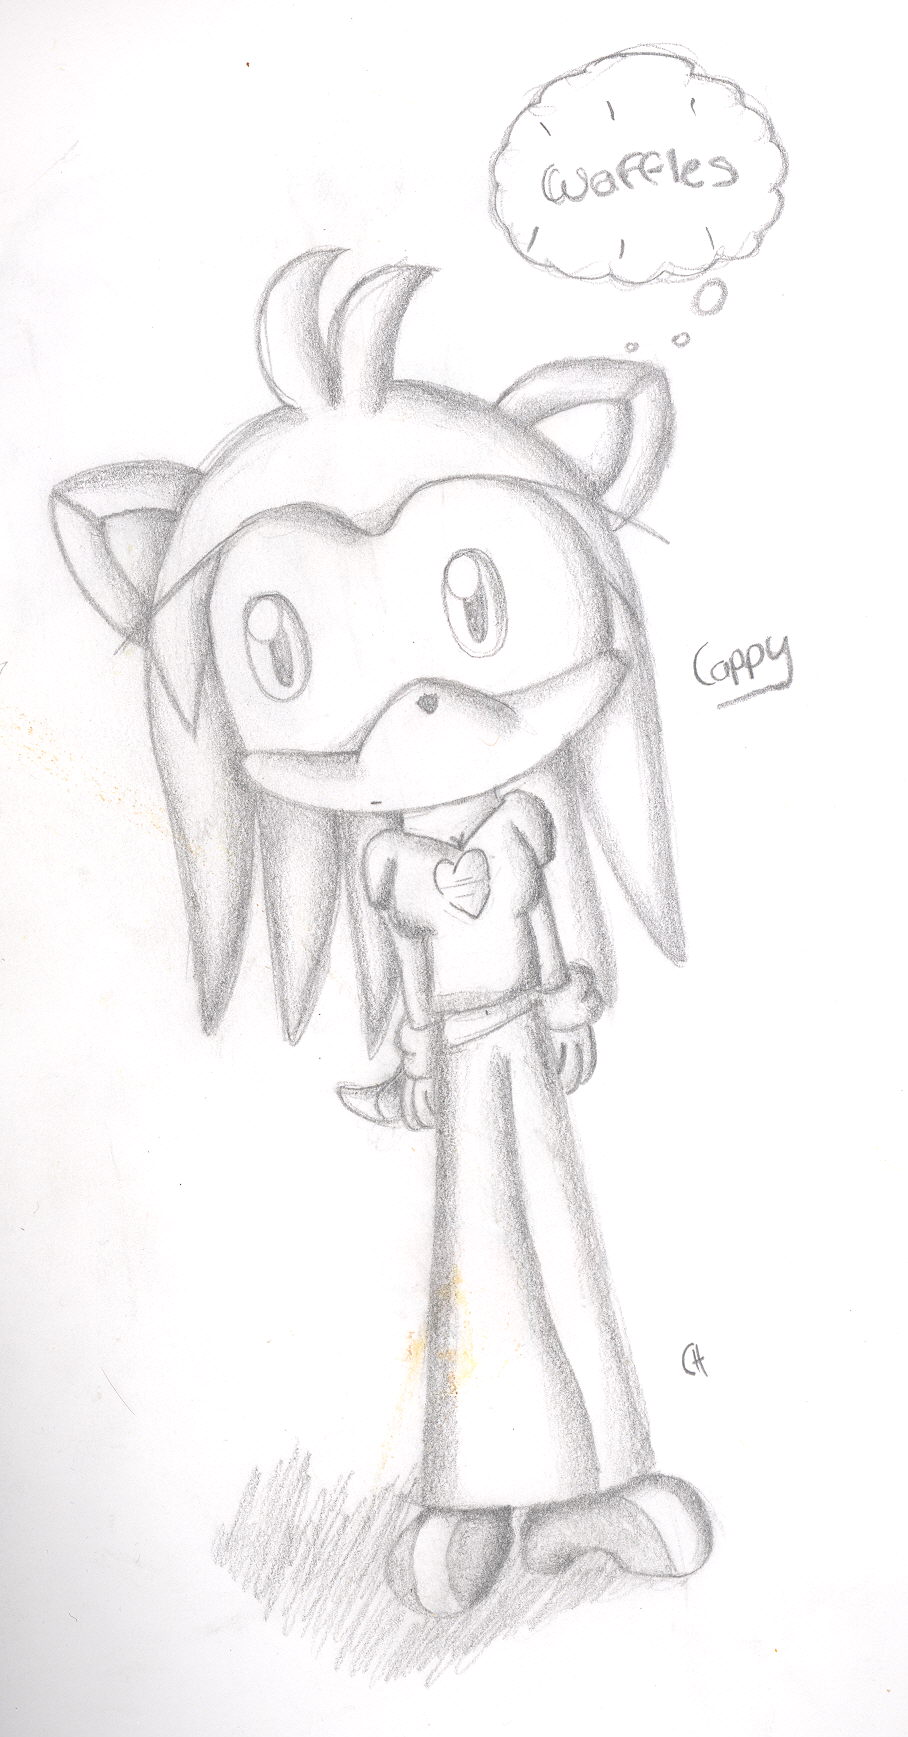 Cappy the hedgehog O_o by cappy1709